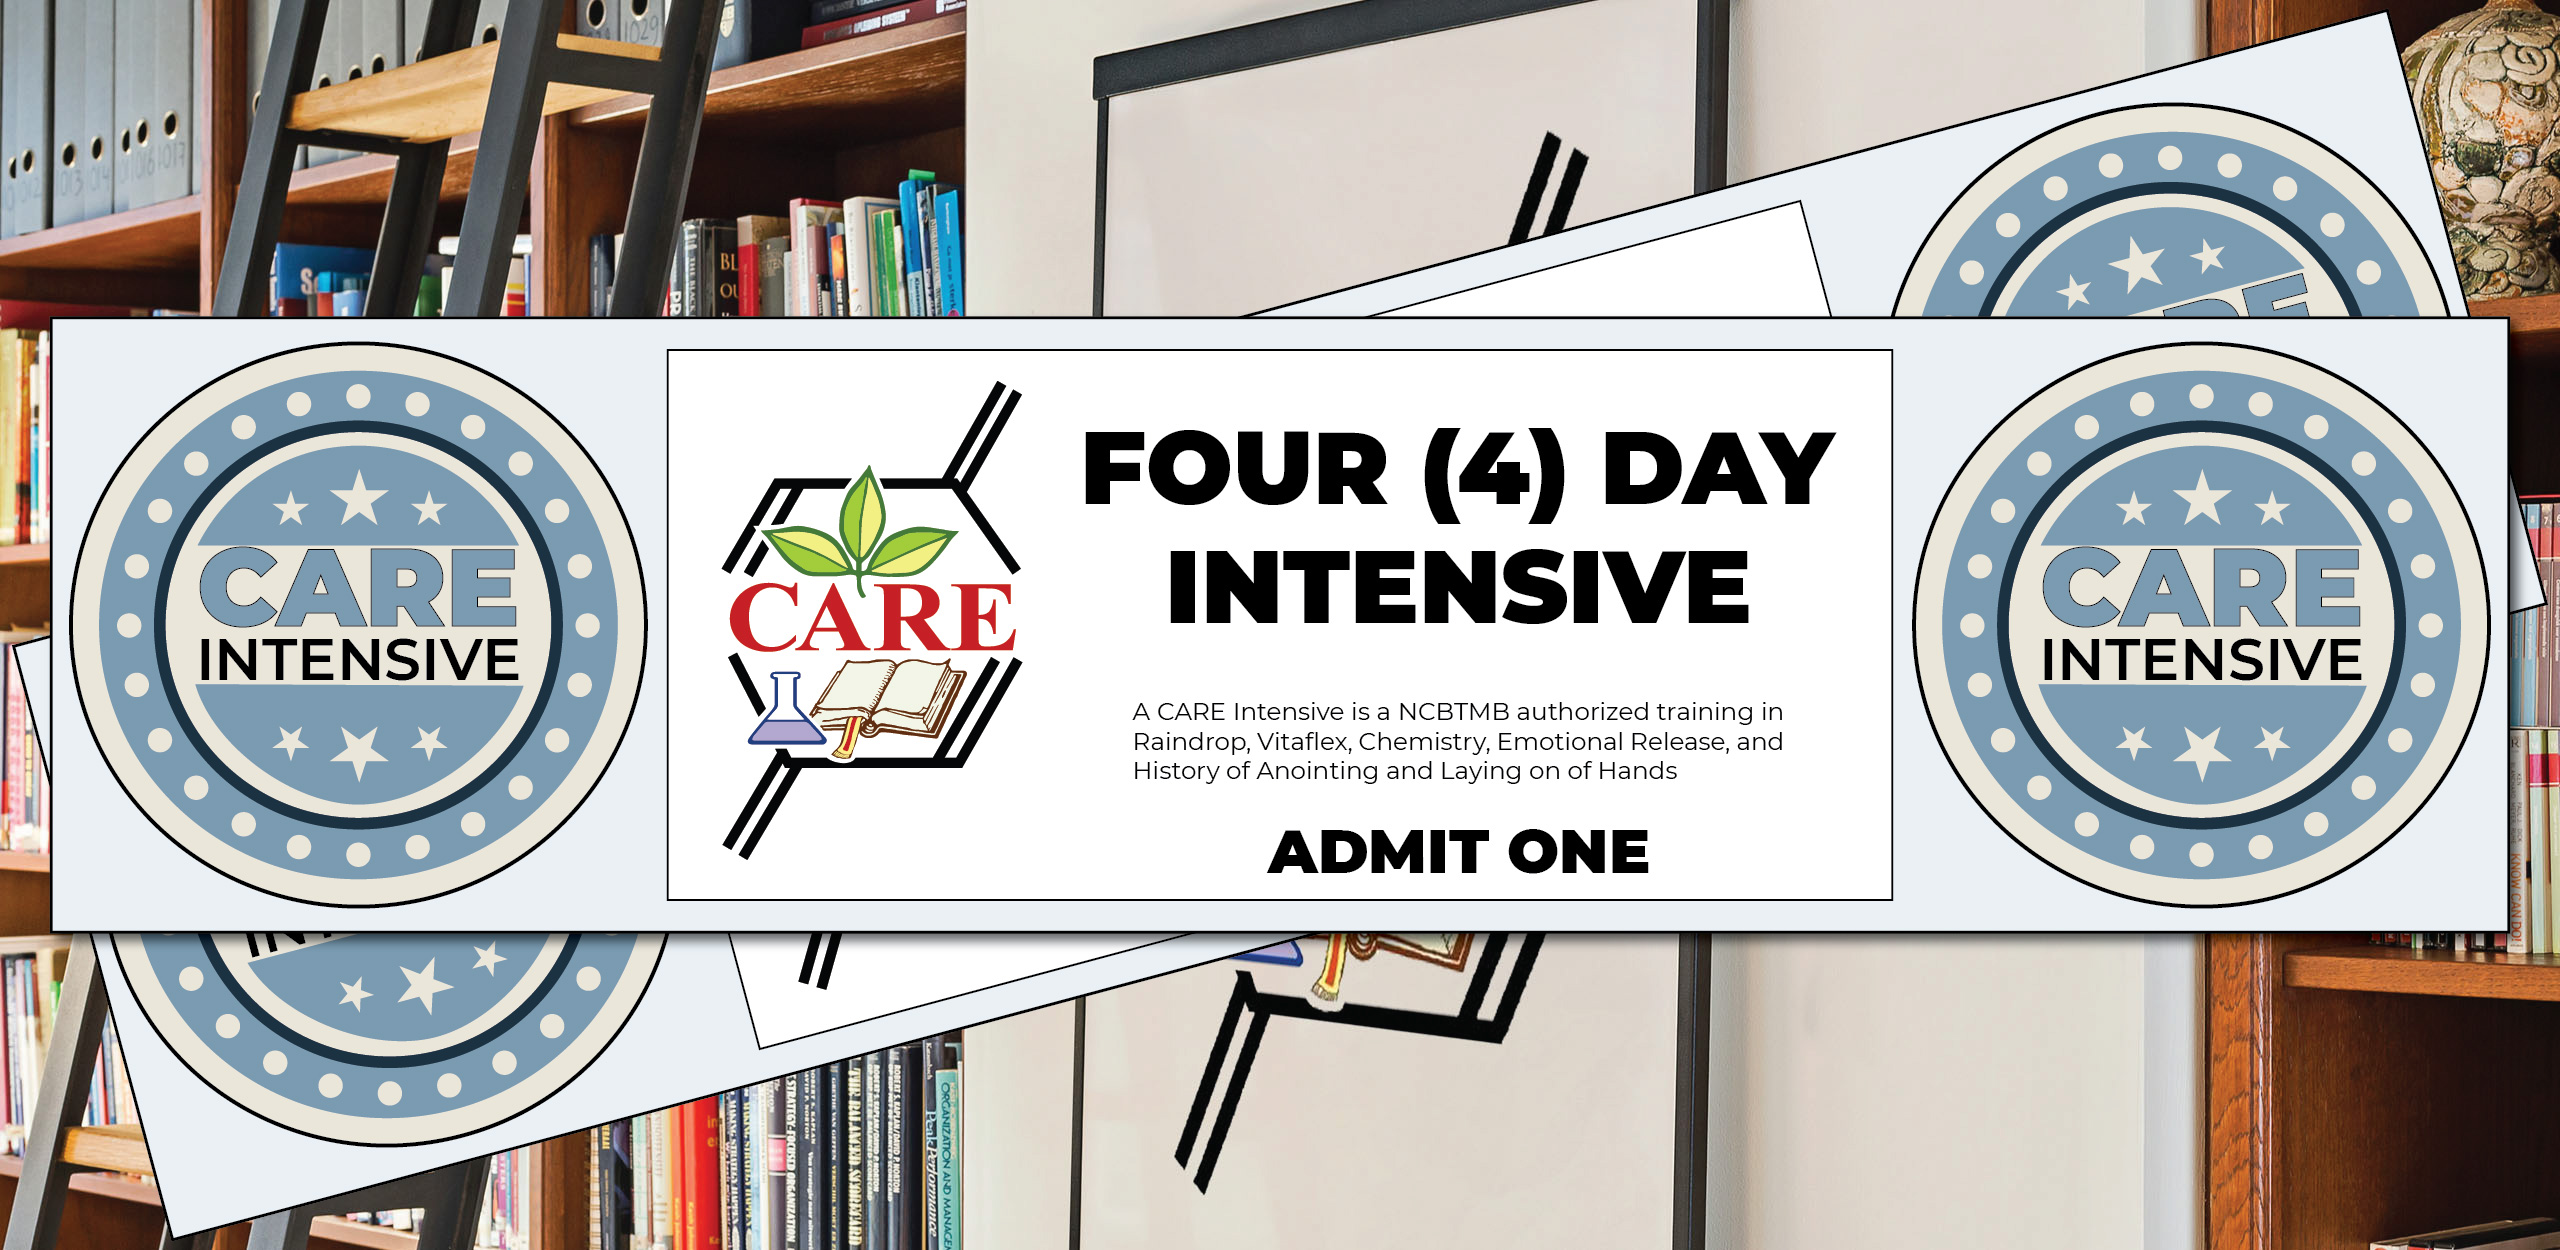 Four (4) Day Intensive